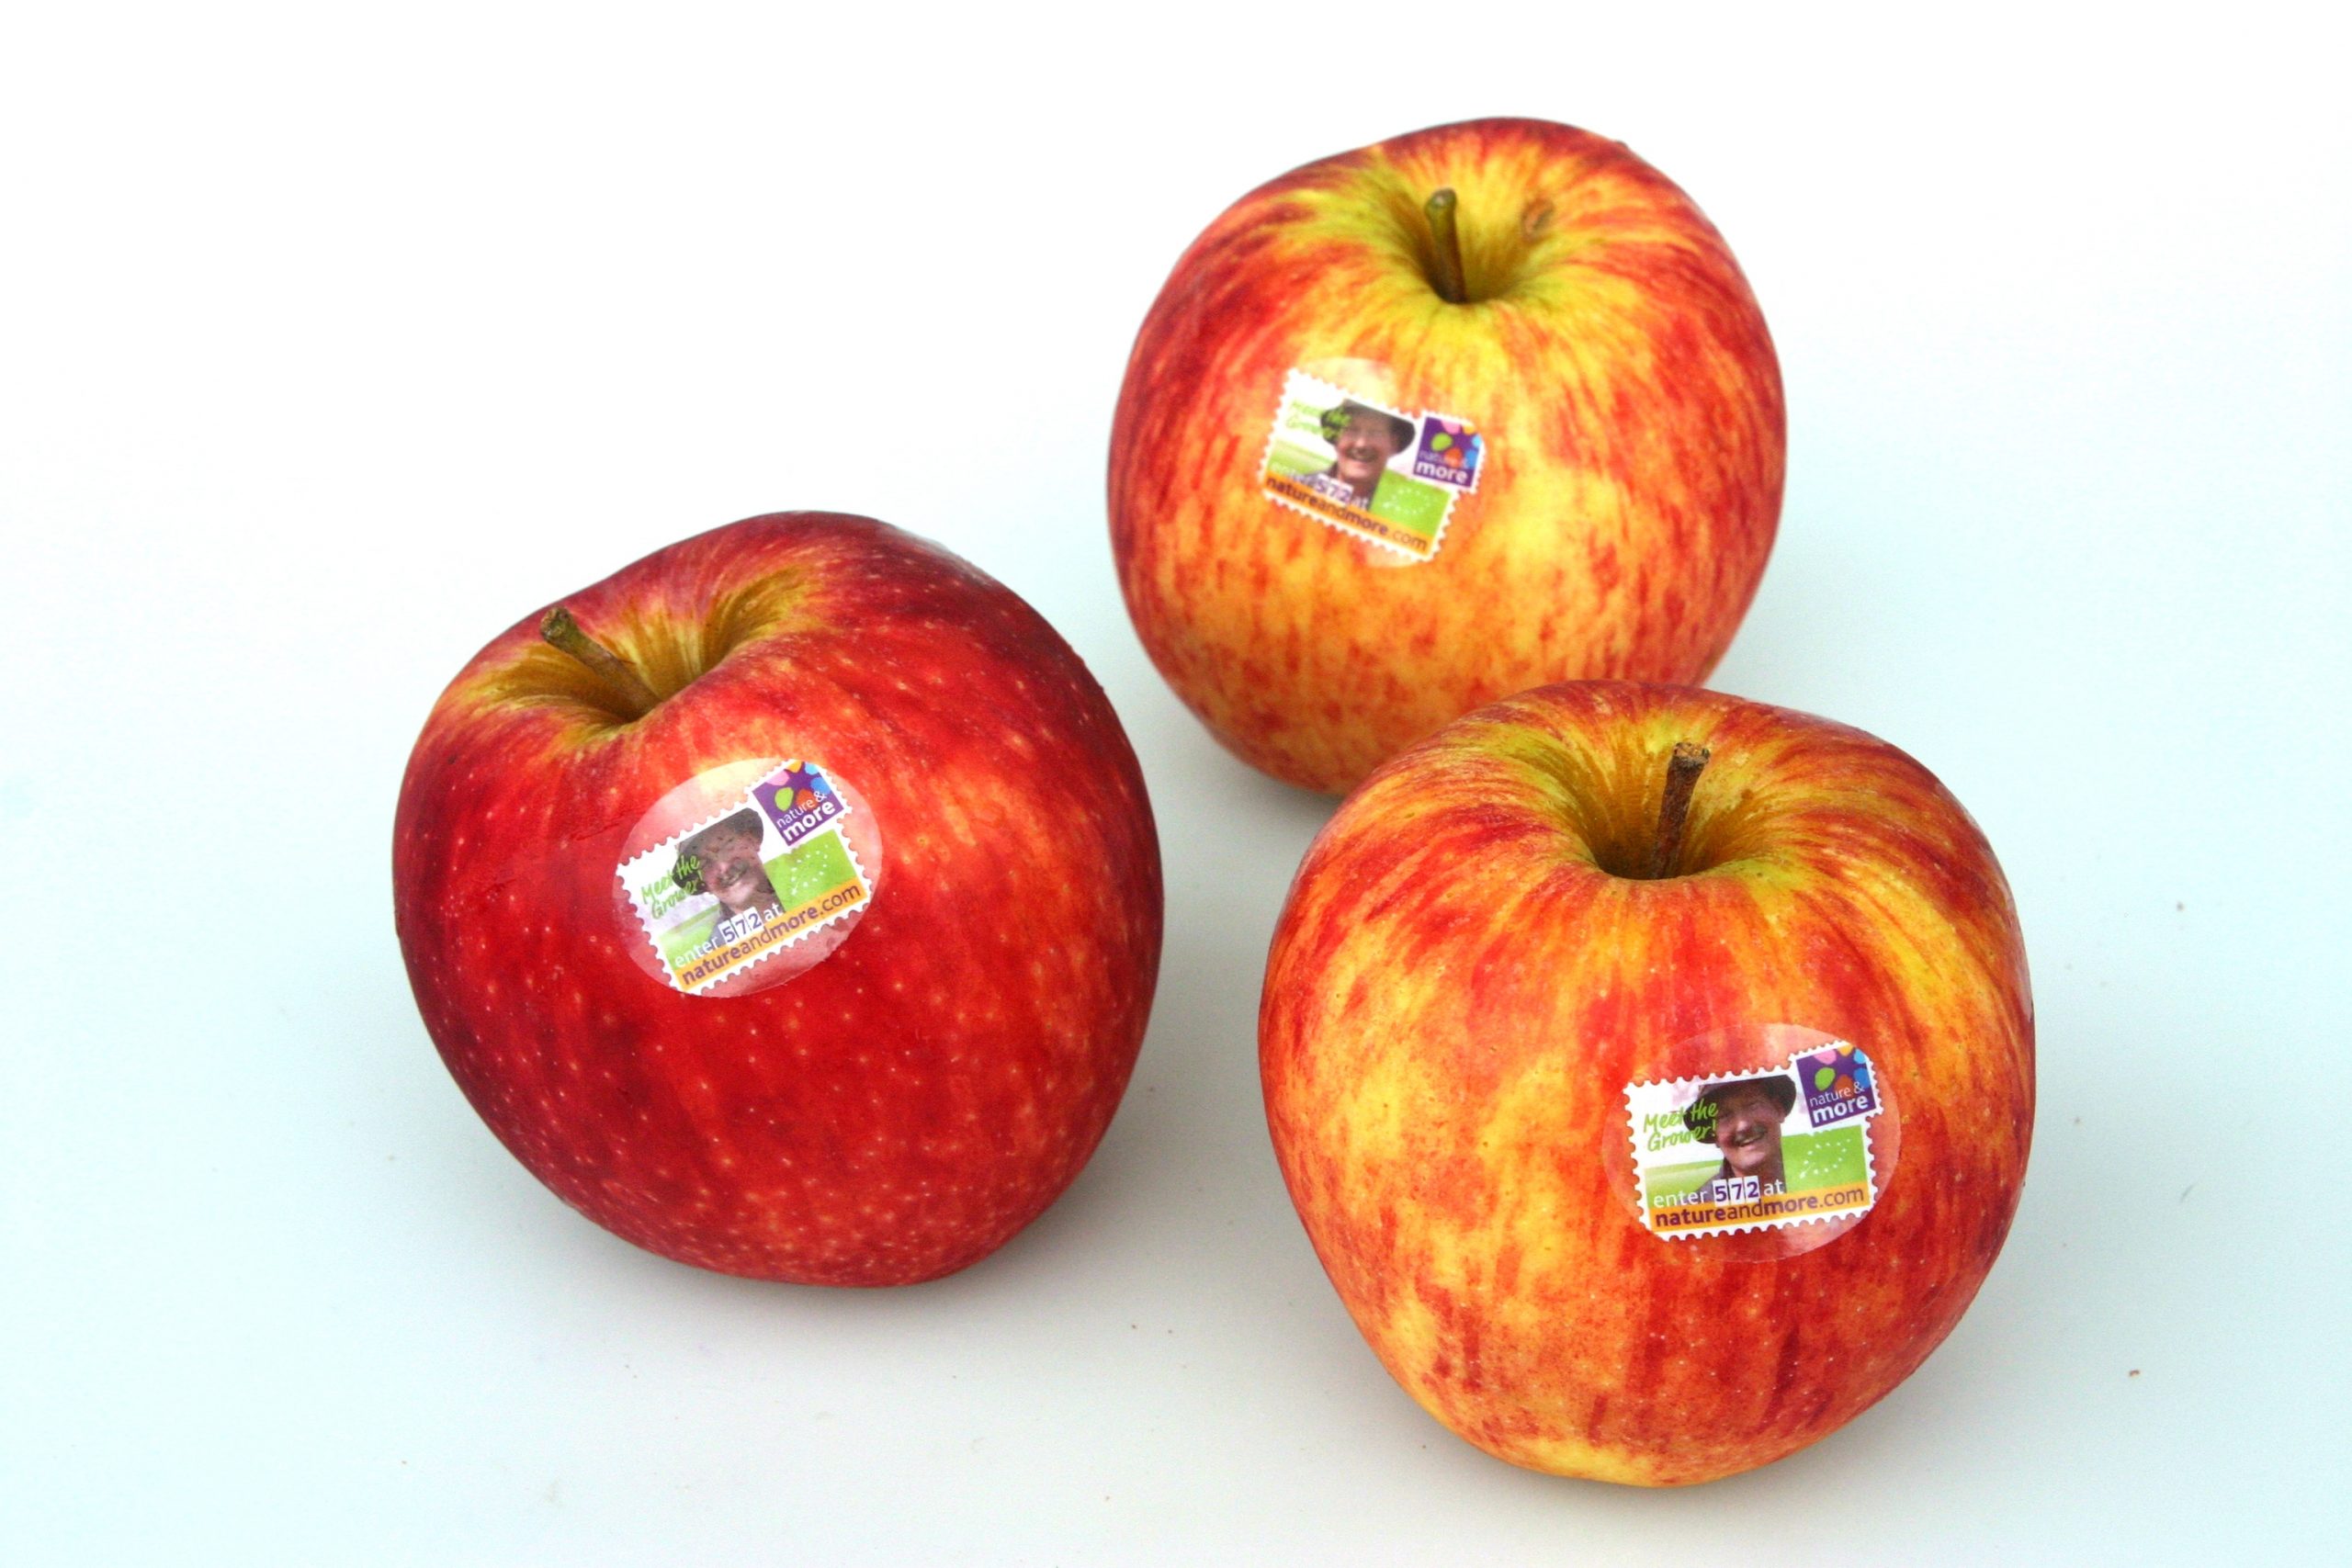 Apples with biodegradable stickers